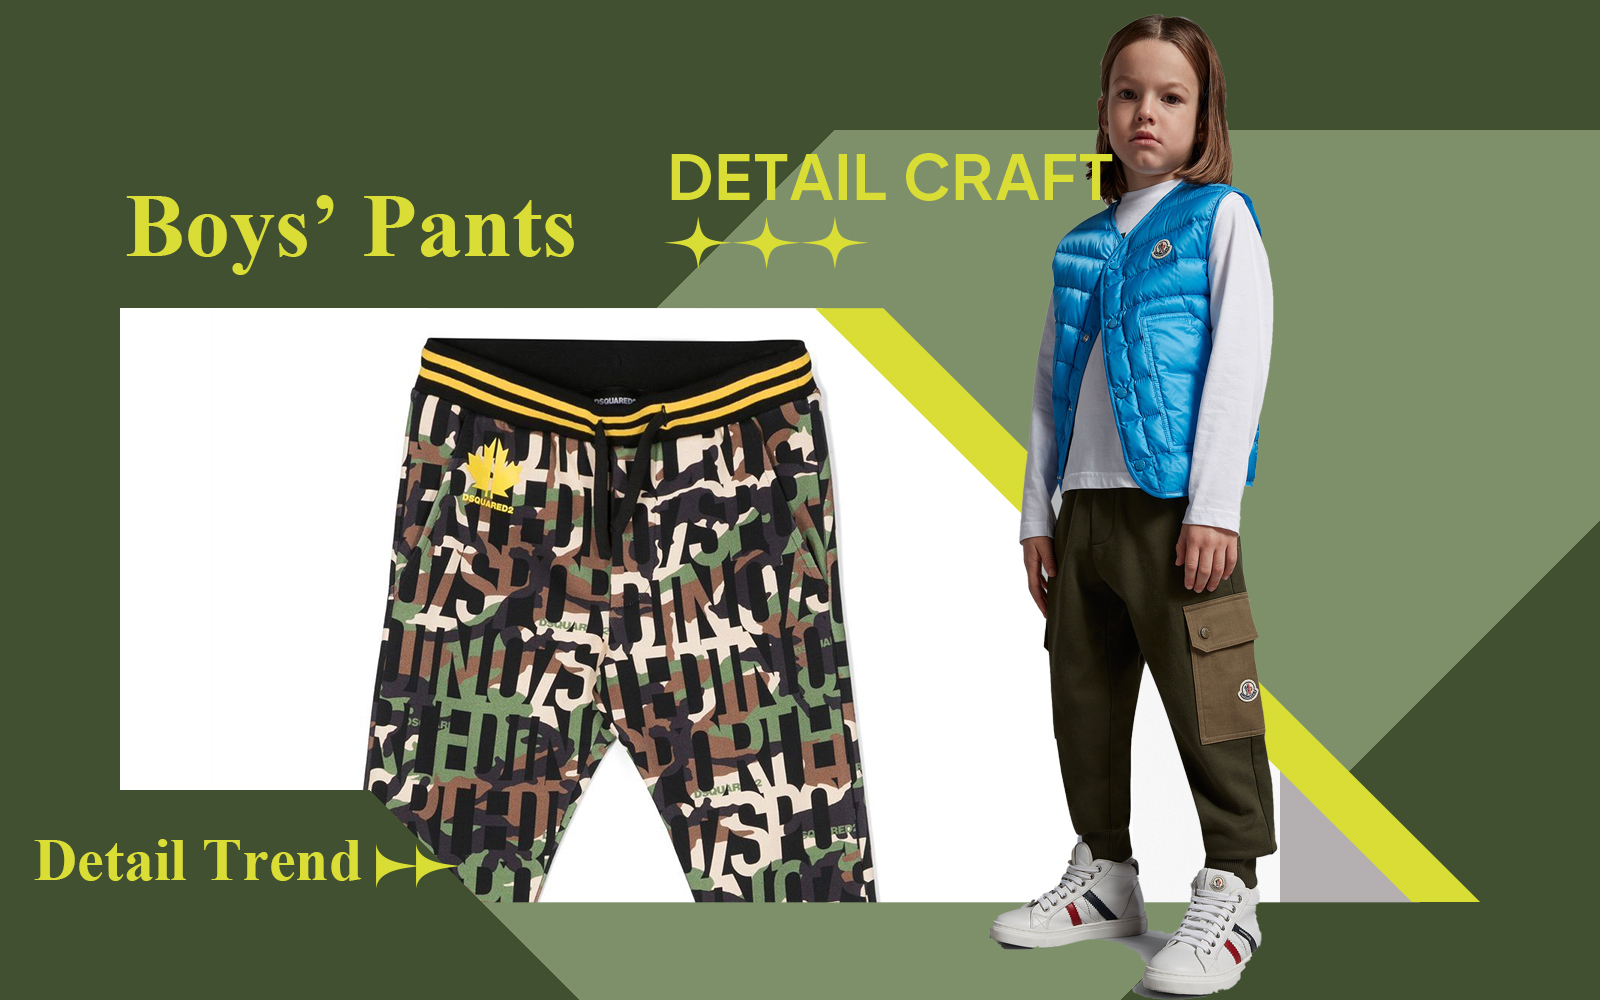 The Detail & Craft Trend for Boys' Pants